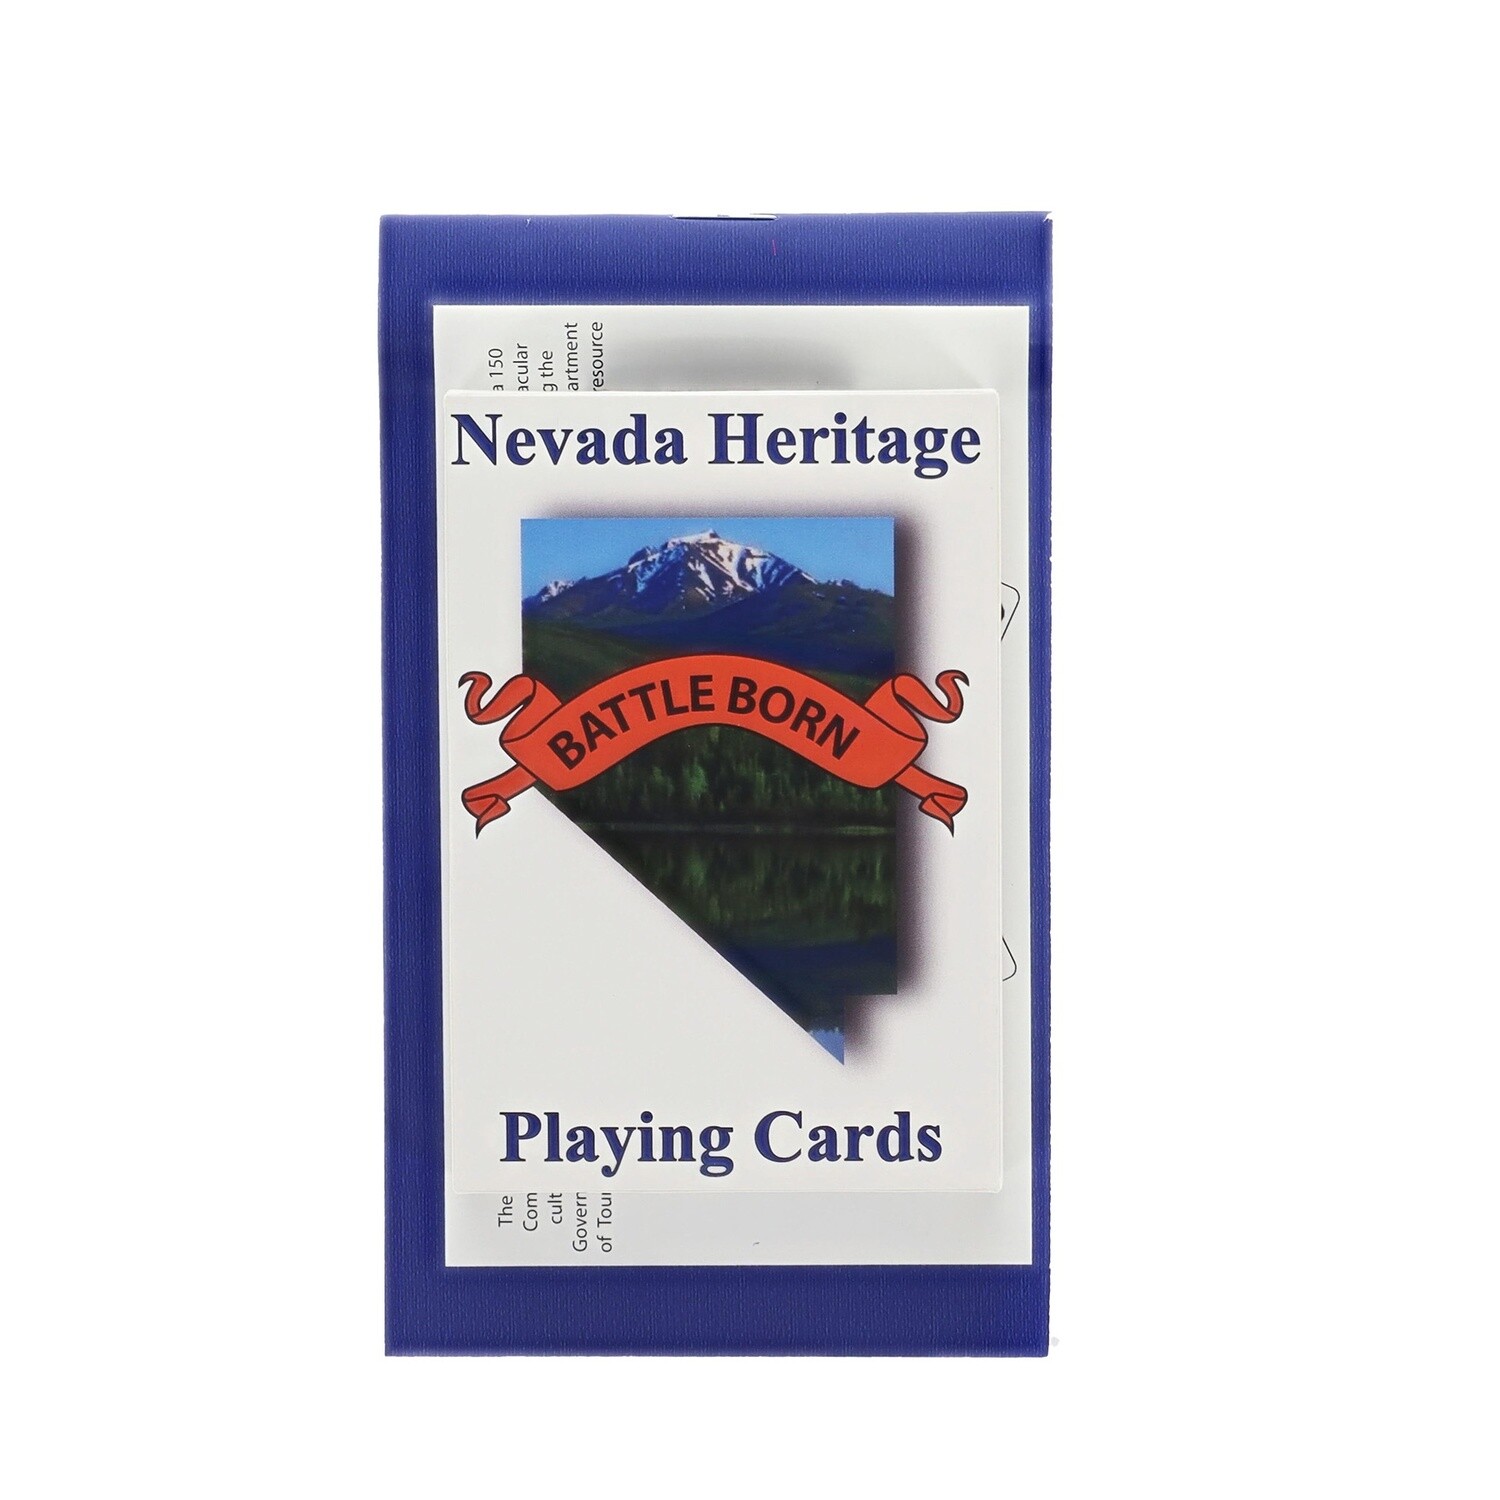 Nevada Heritage Playing Cards